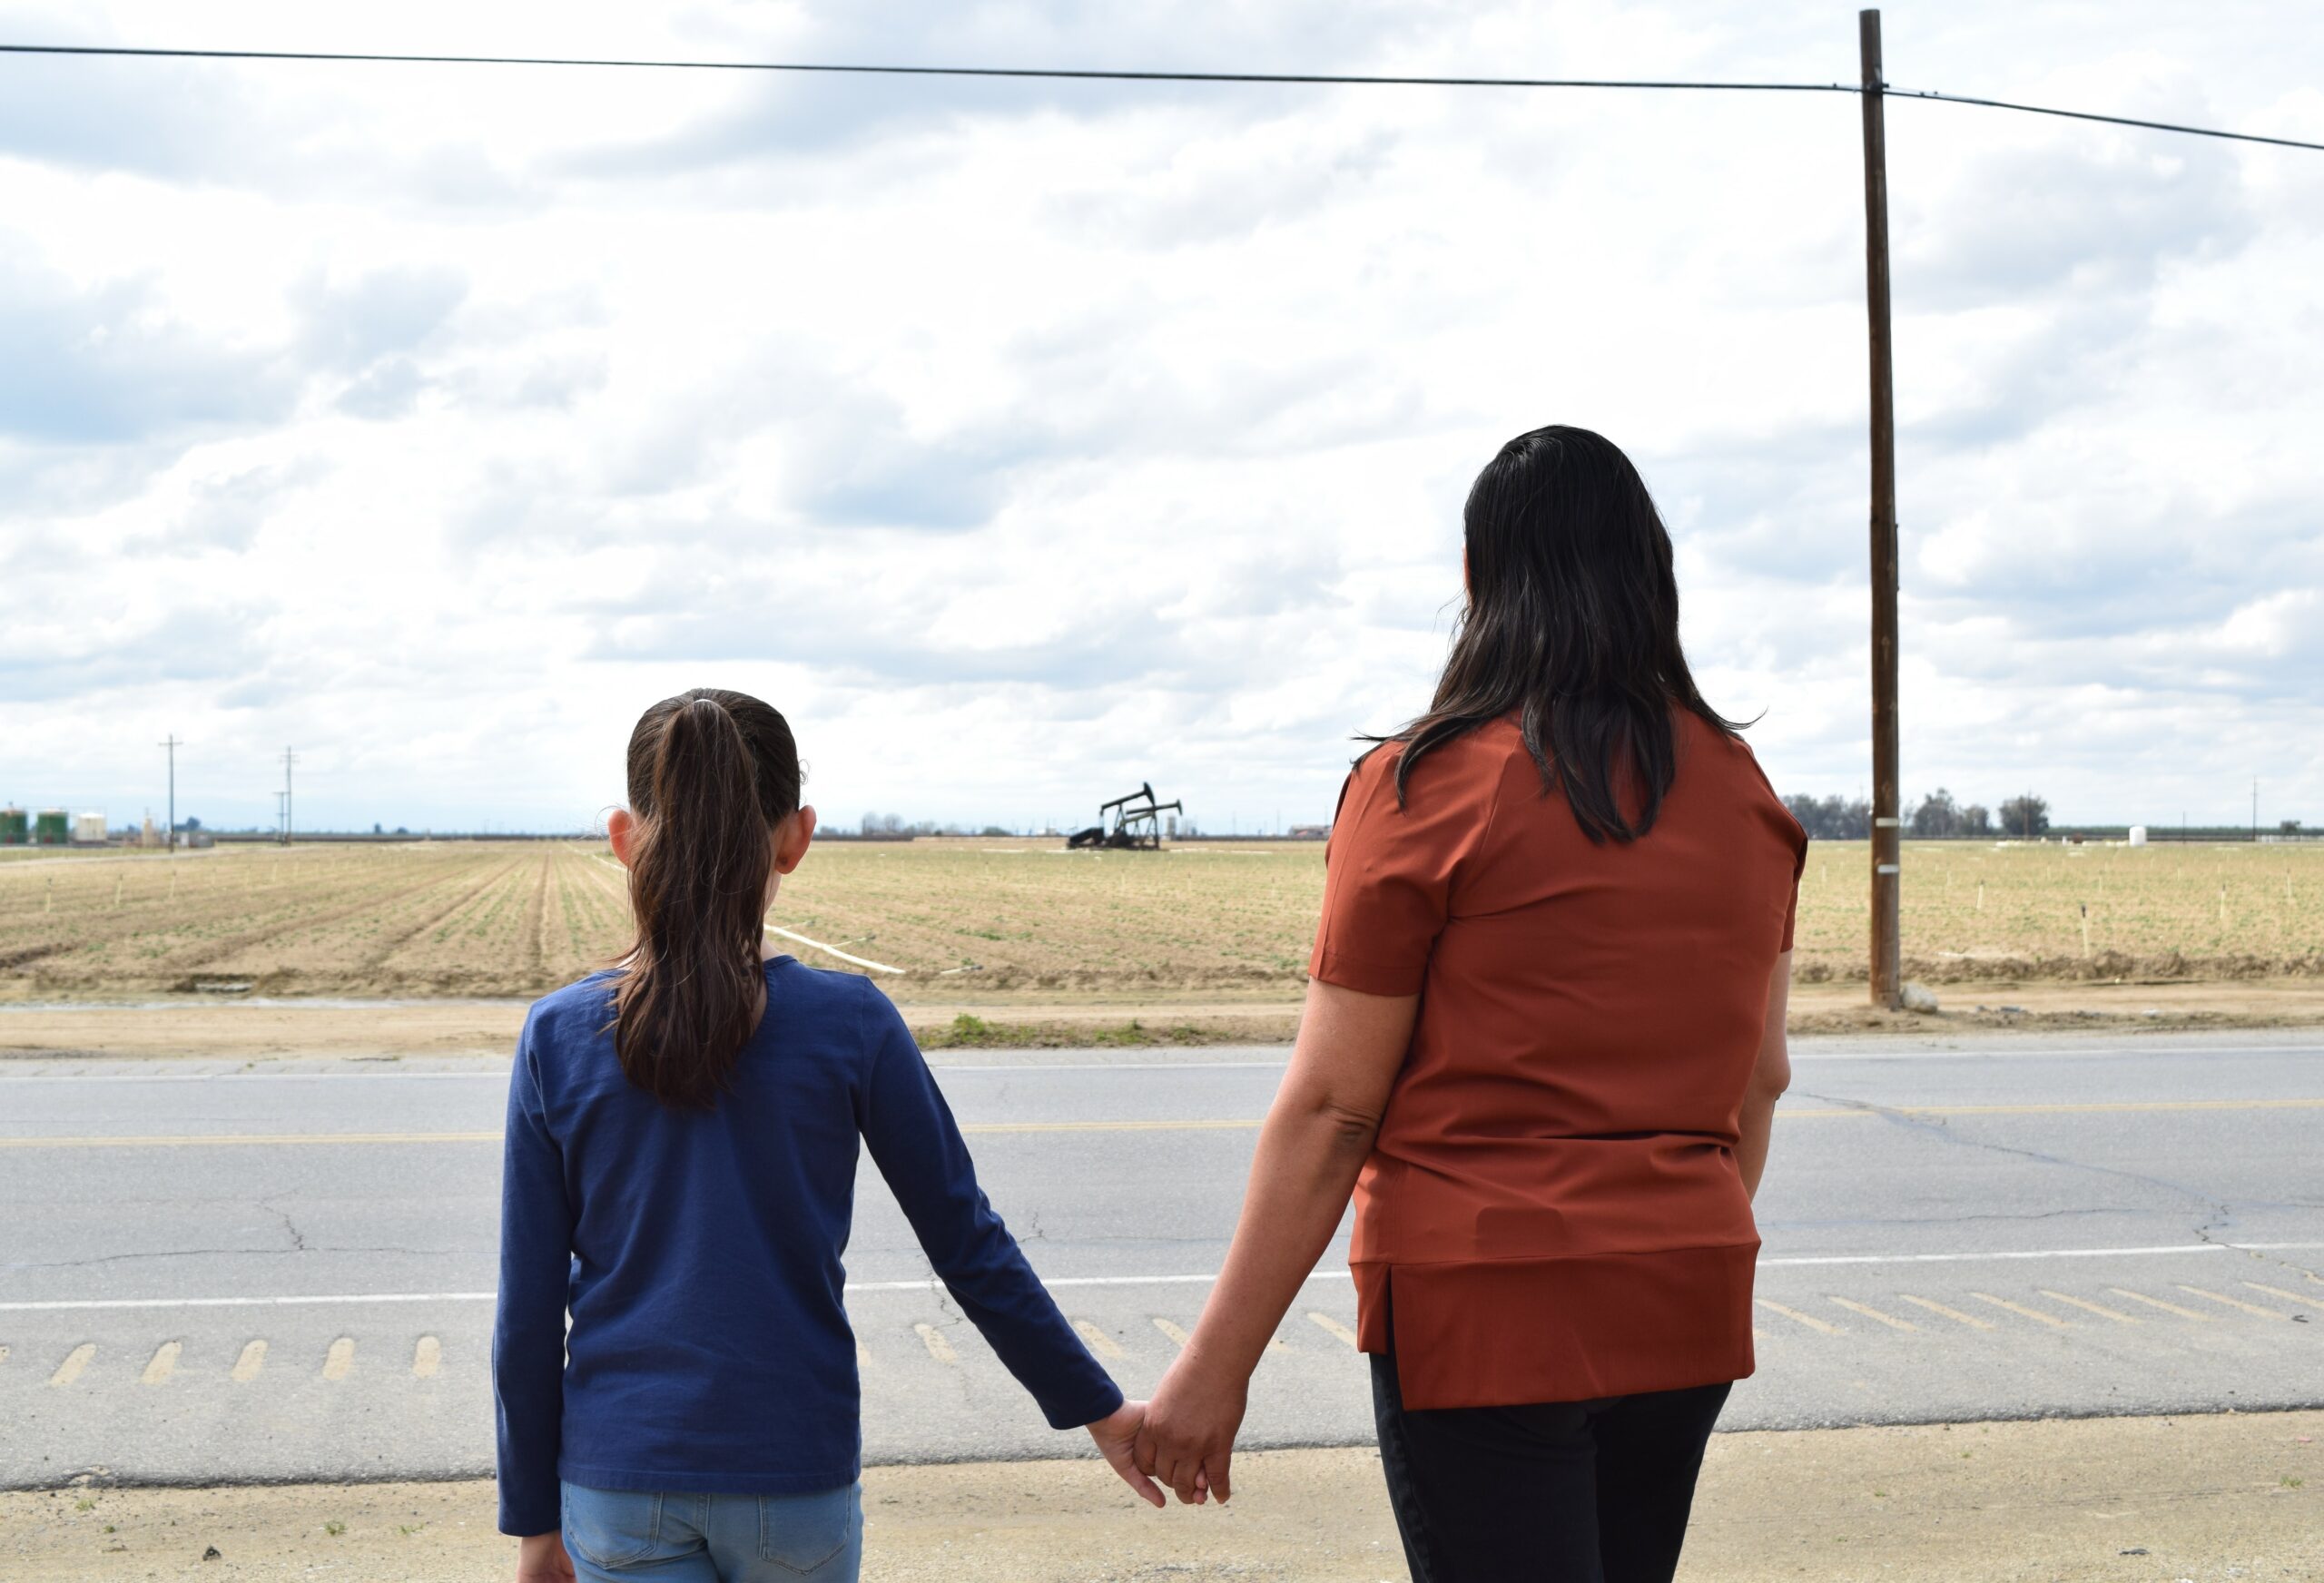 Pictured: A young child is on the left wearing blue with their mother on the right wearing red. They are holding hands and looking out into a large empty field located in Arvin. The sky is cloudy.